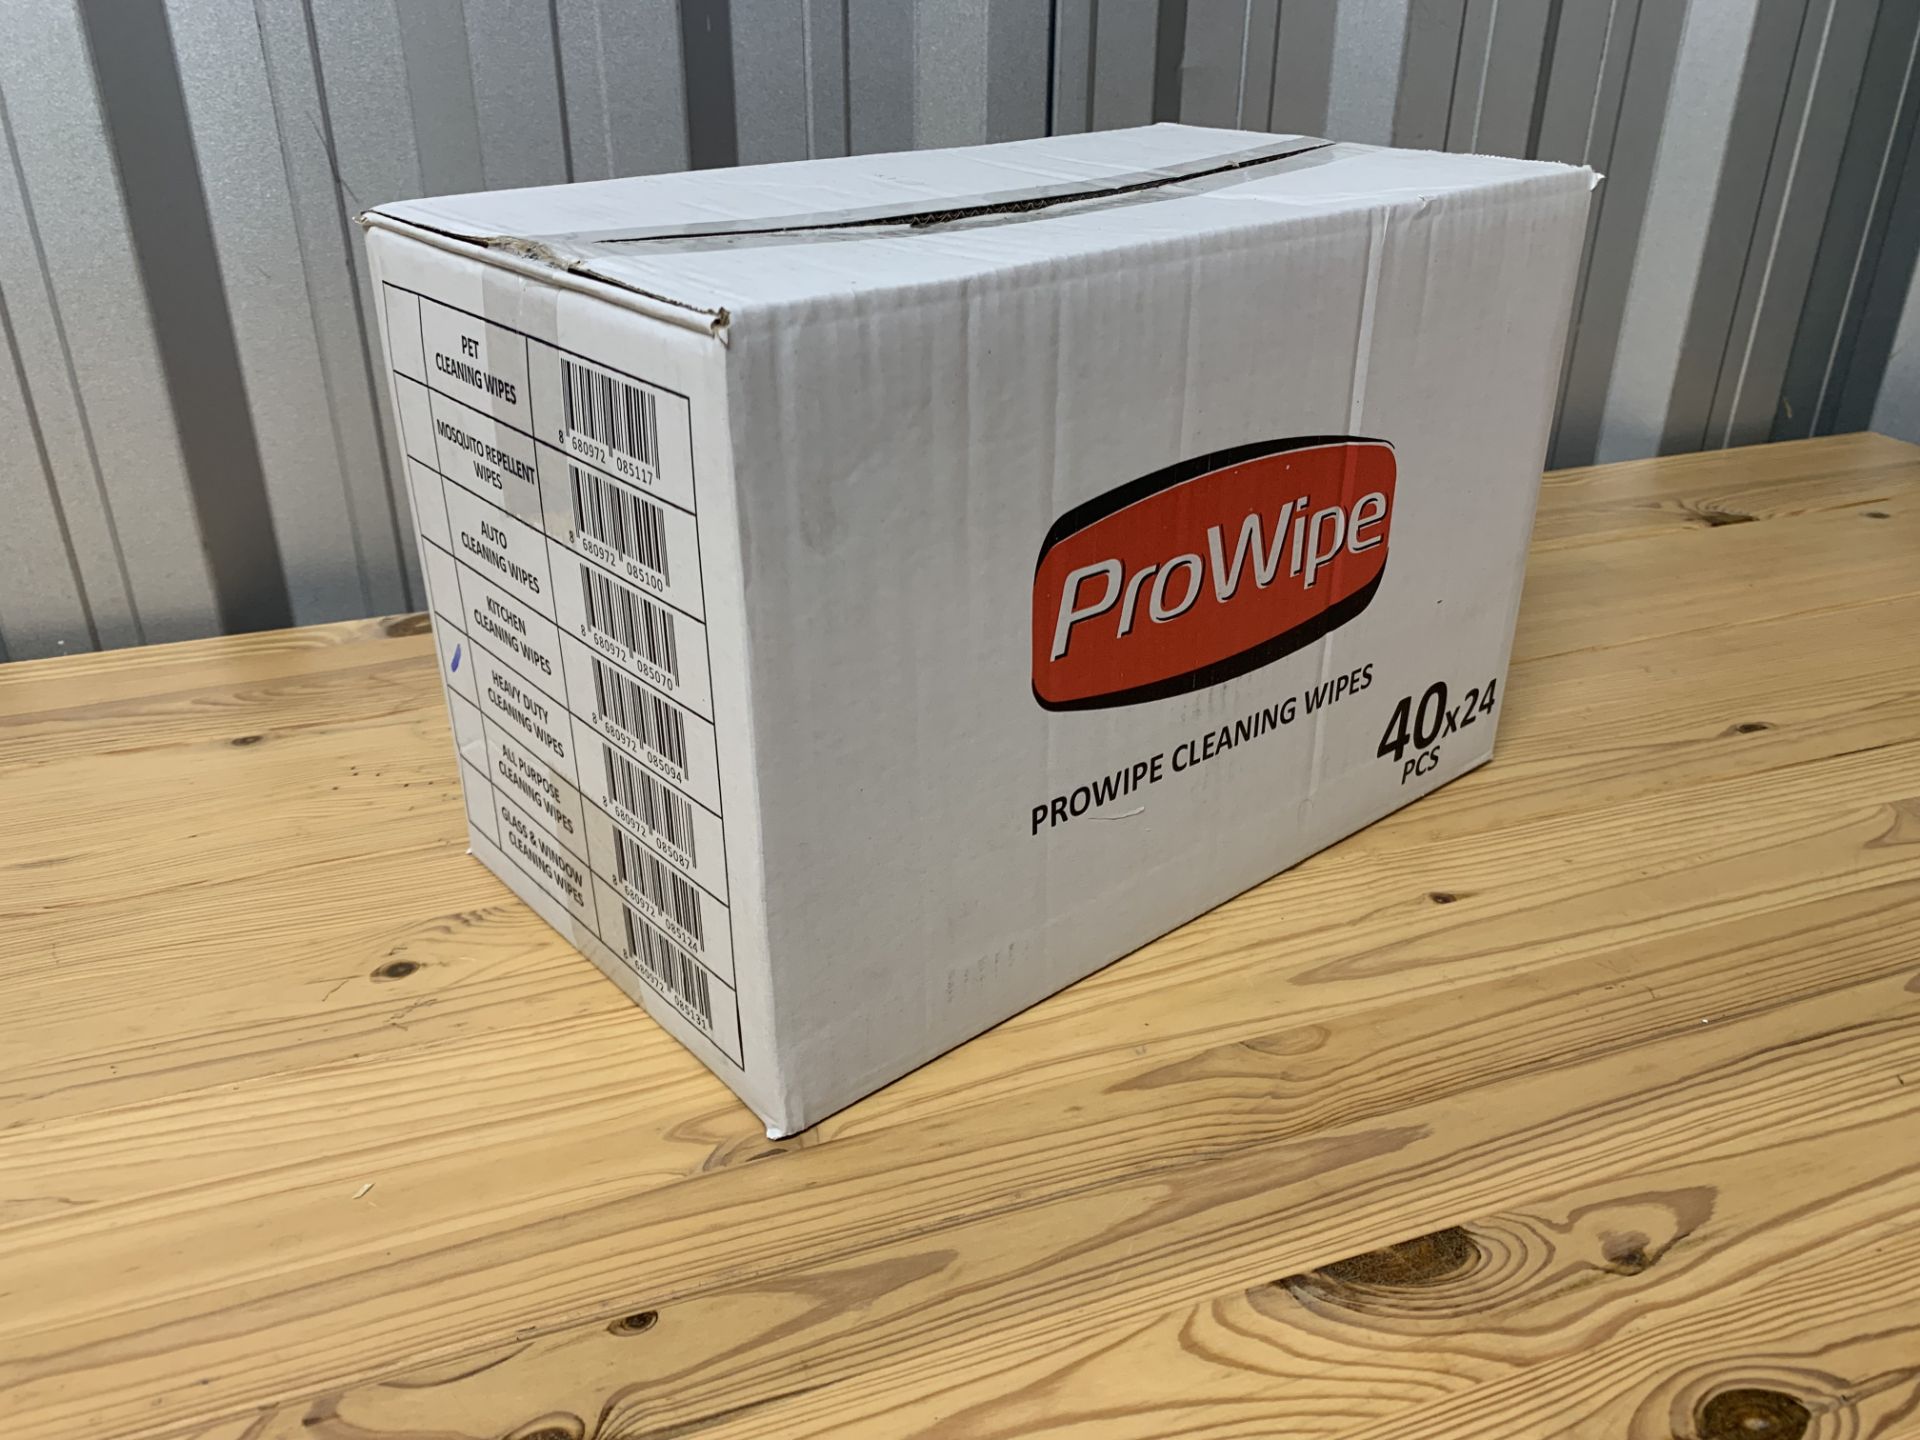 24x ProWipe Heavy Duty Cleaning Wipes - Image 10 of 10